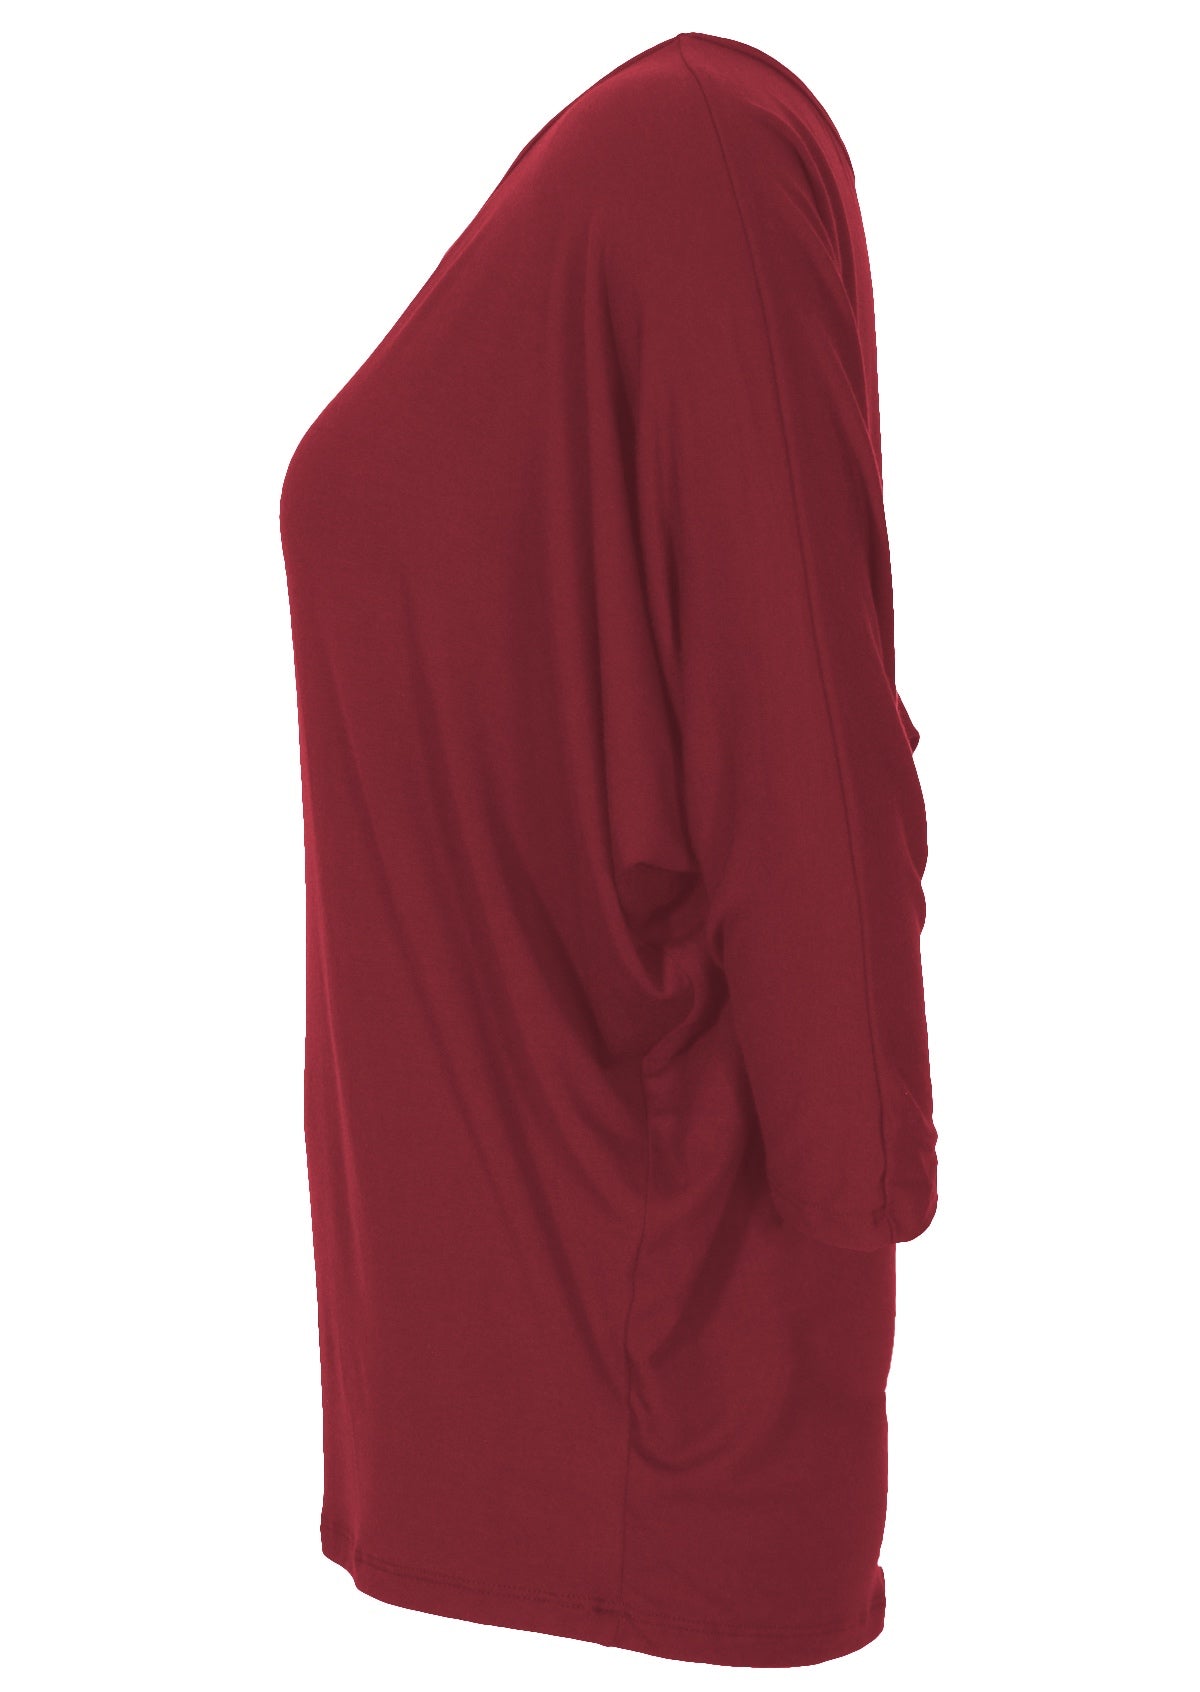 Side view of loose fitted maroon women's rayon top